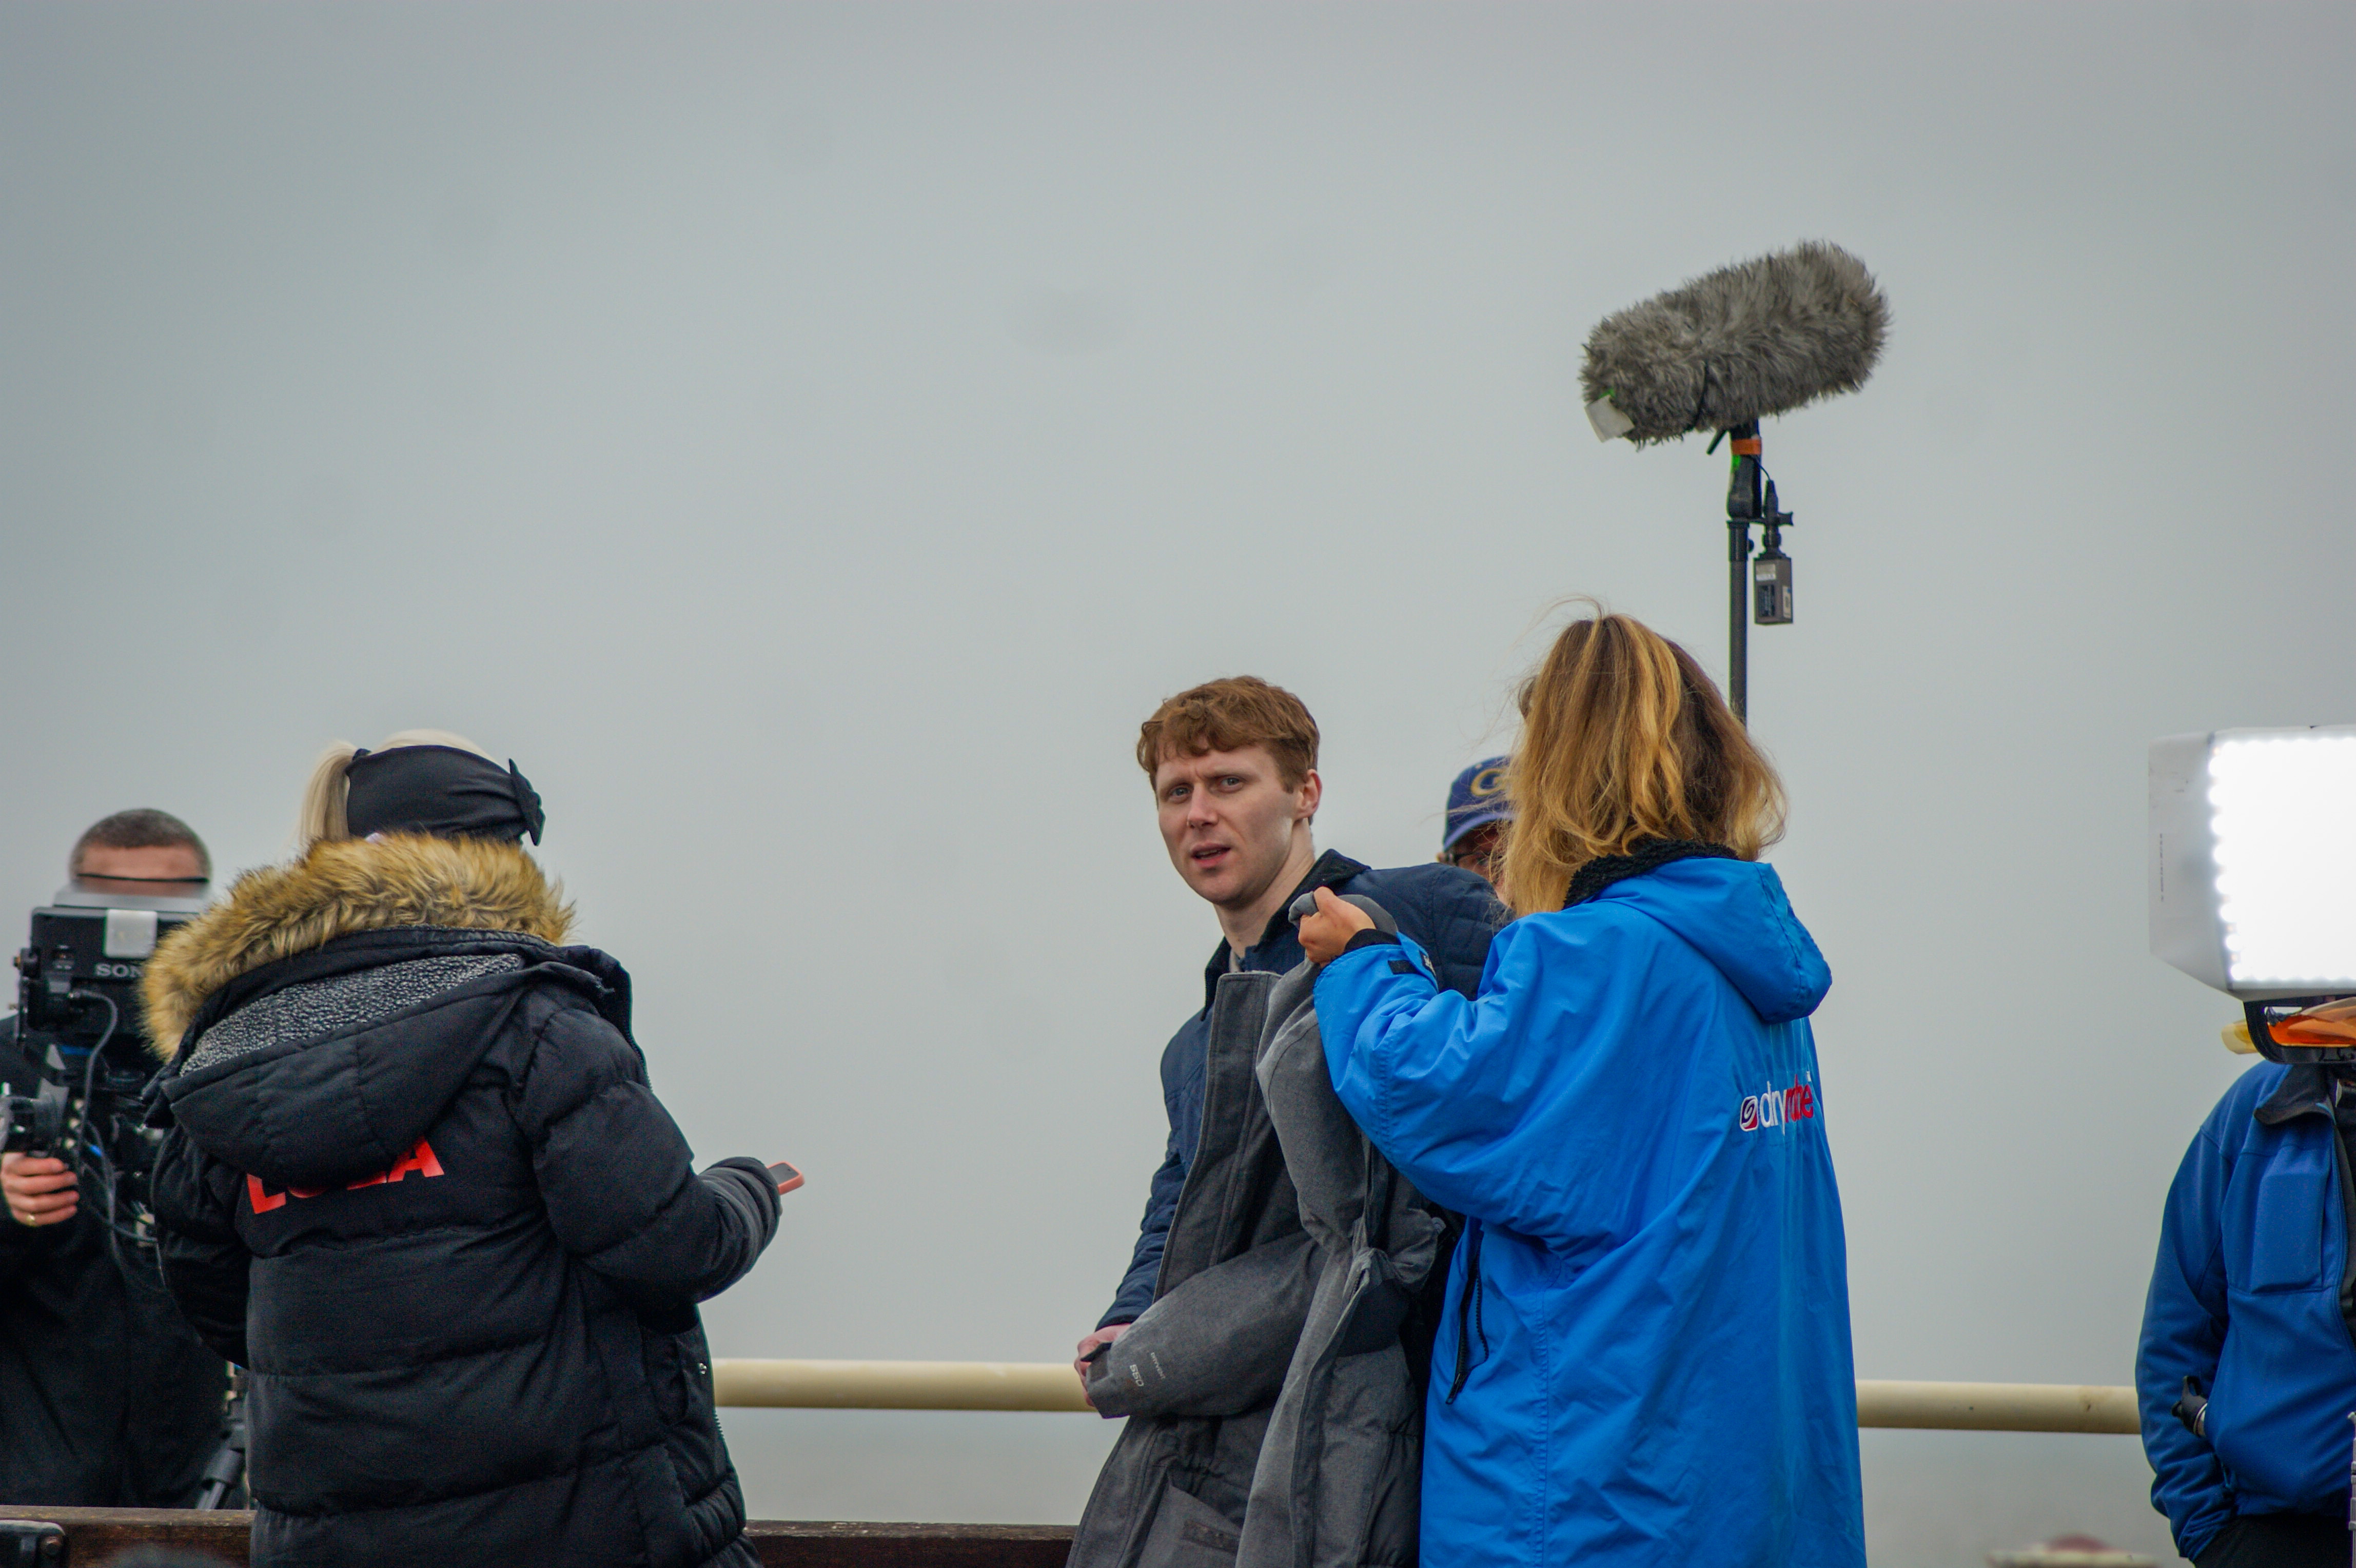 Margate has proven to be a popular filming location in recent years